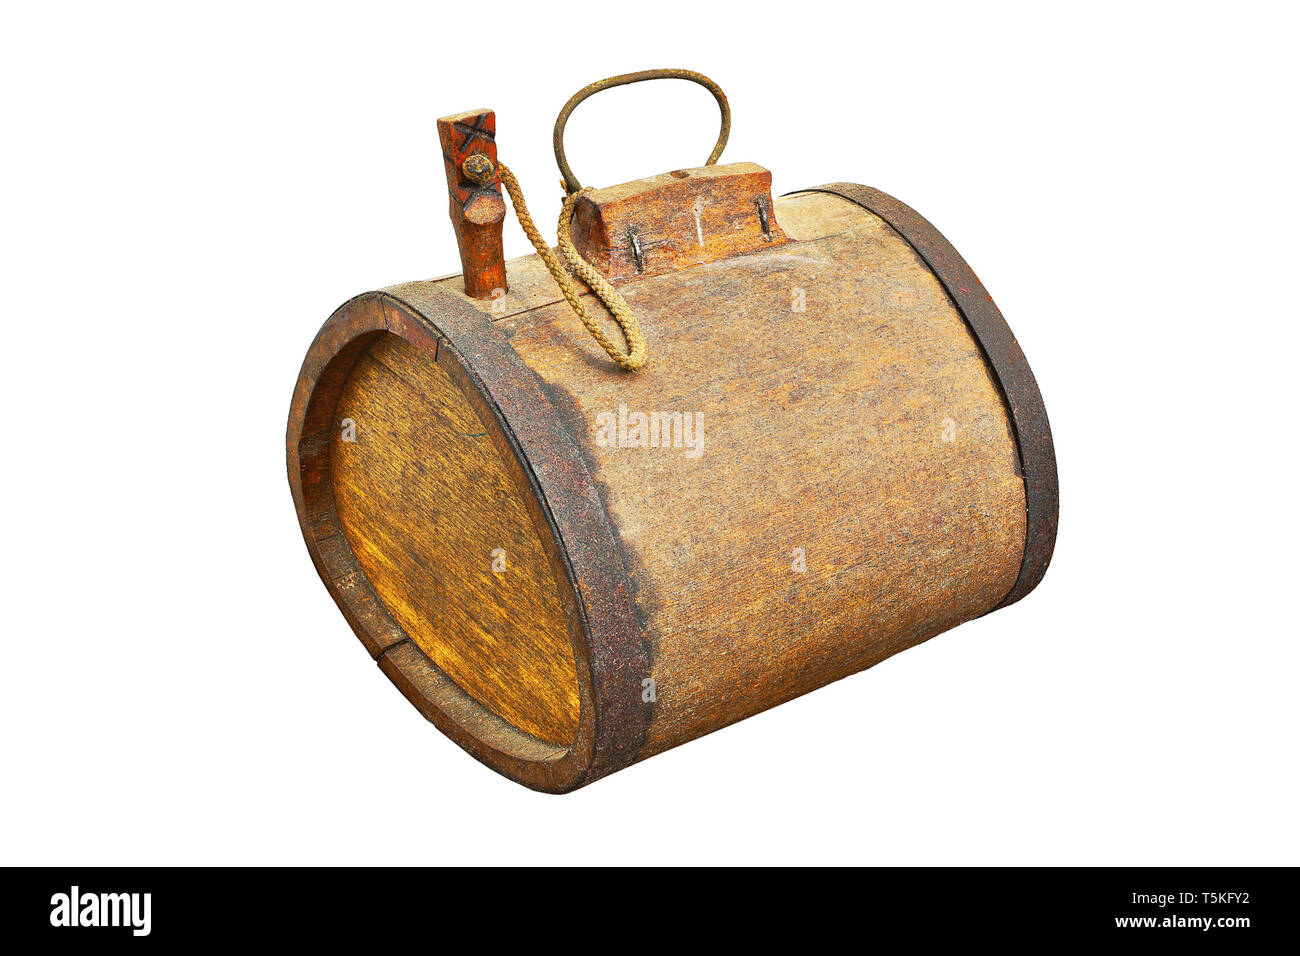 old wooden barrel for alcohol, isolation of historic object over white background Stock Photo